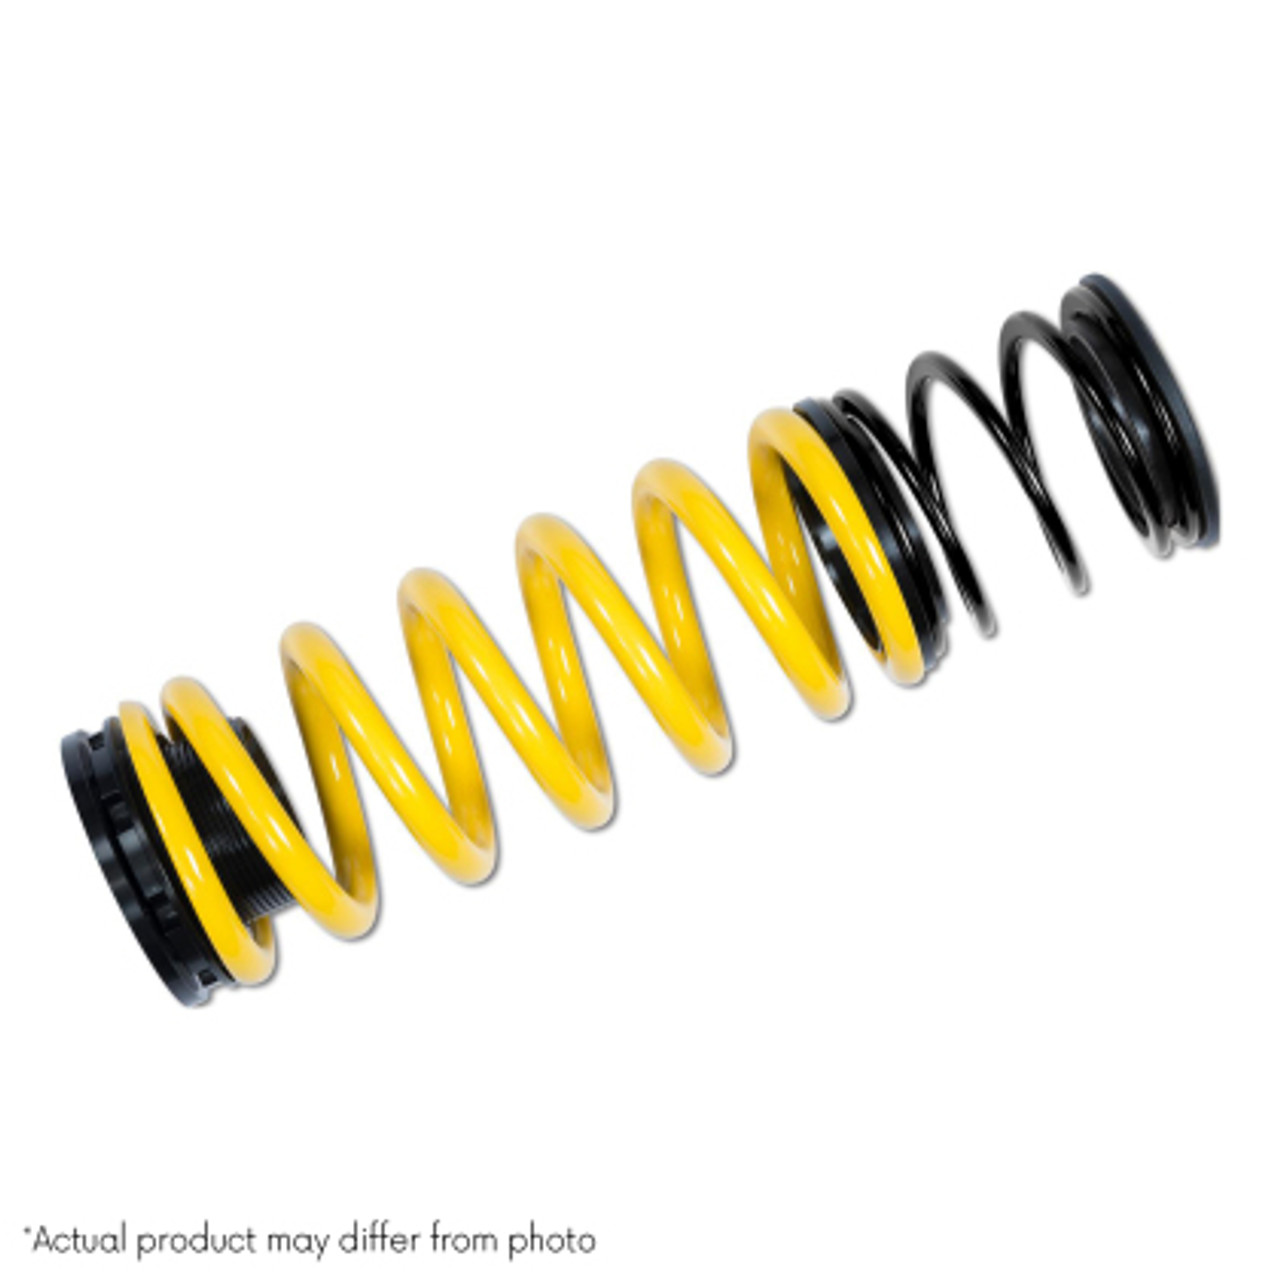 ST Adjustable Lowering Springs for F80 M3, F82 M4 & F87 M2